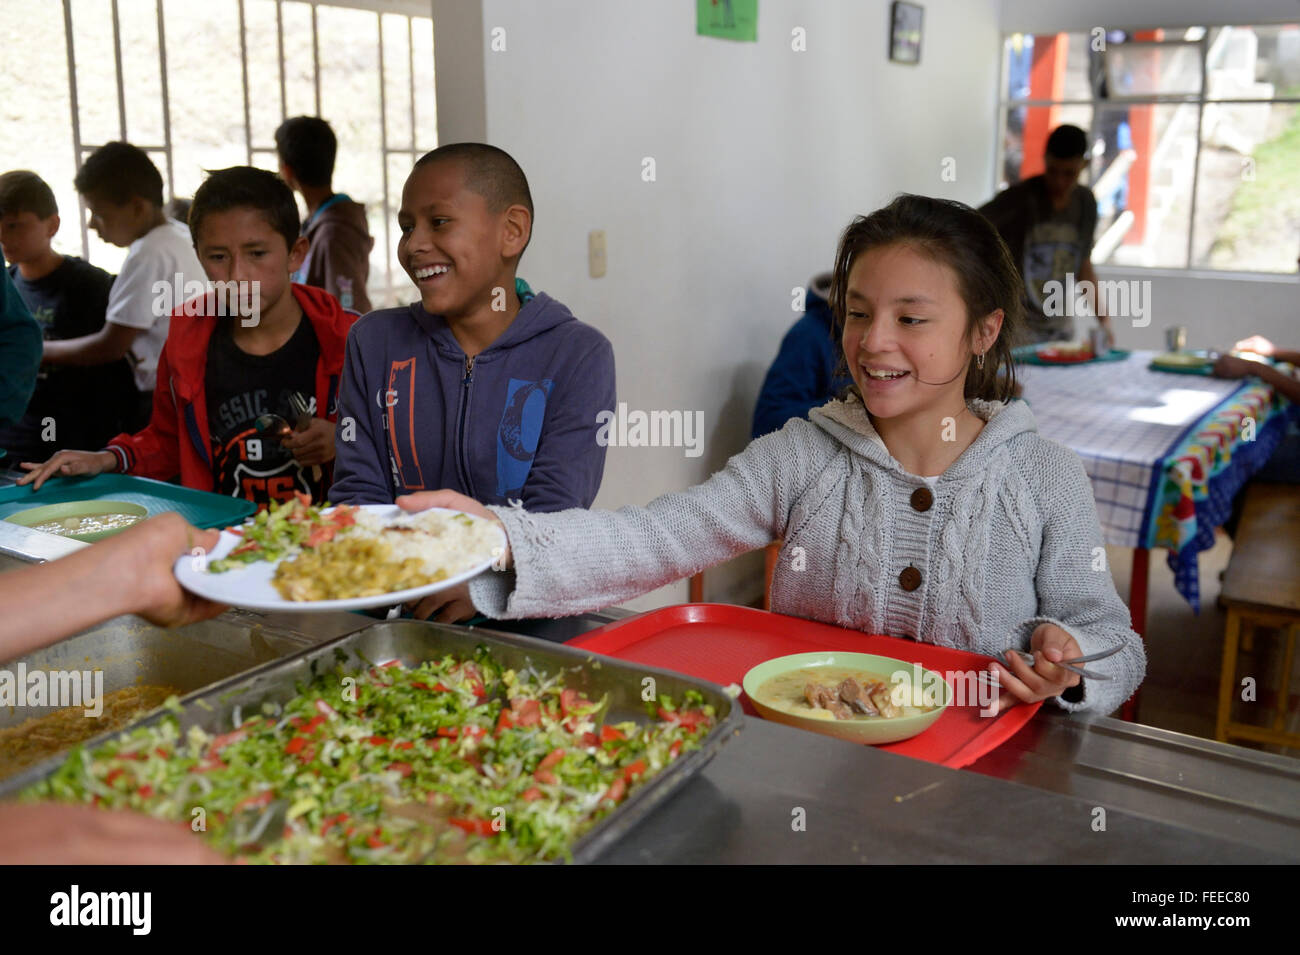 Girl receiving food at the food counter of a cafeteria, social project, Bogota, Colombia Stock Photo